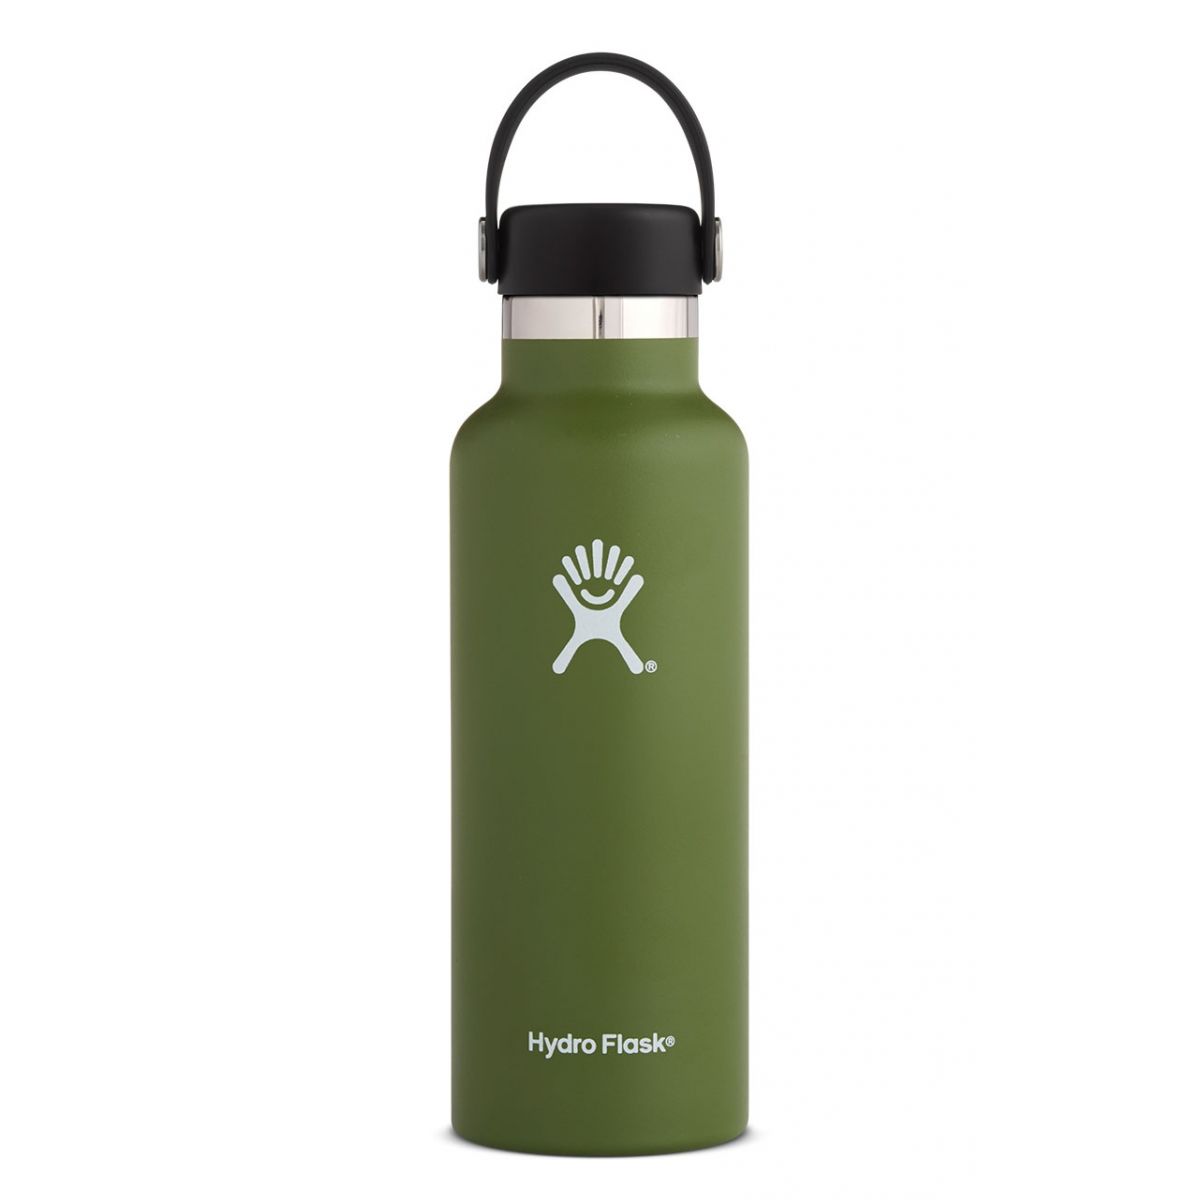 Hydro Flask 18 oz Standard Mouth Insulated Water Bottle